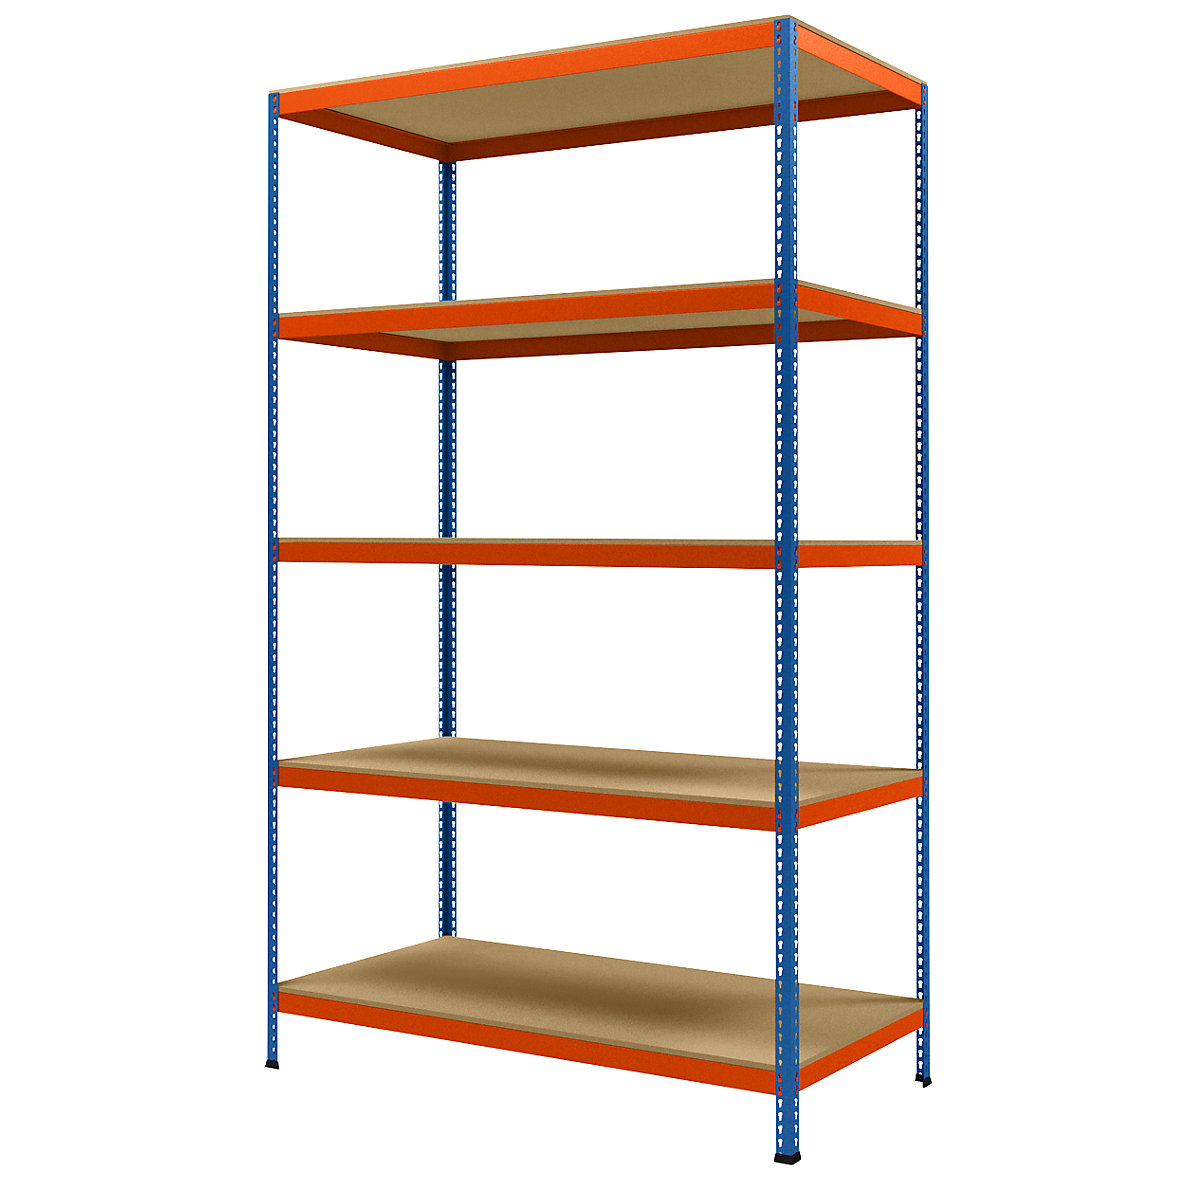 Wide span heavy duty shelving, height 3048 mm, overall depth 926 mm, width 1841 mm